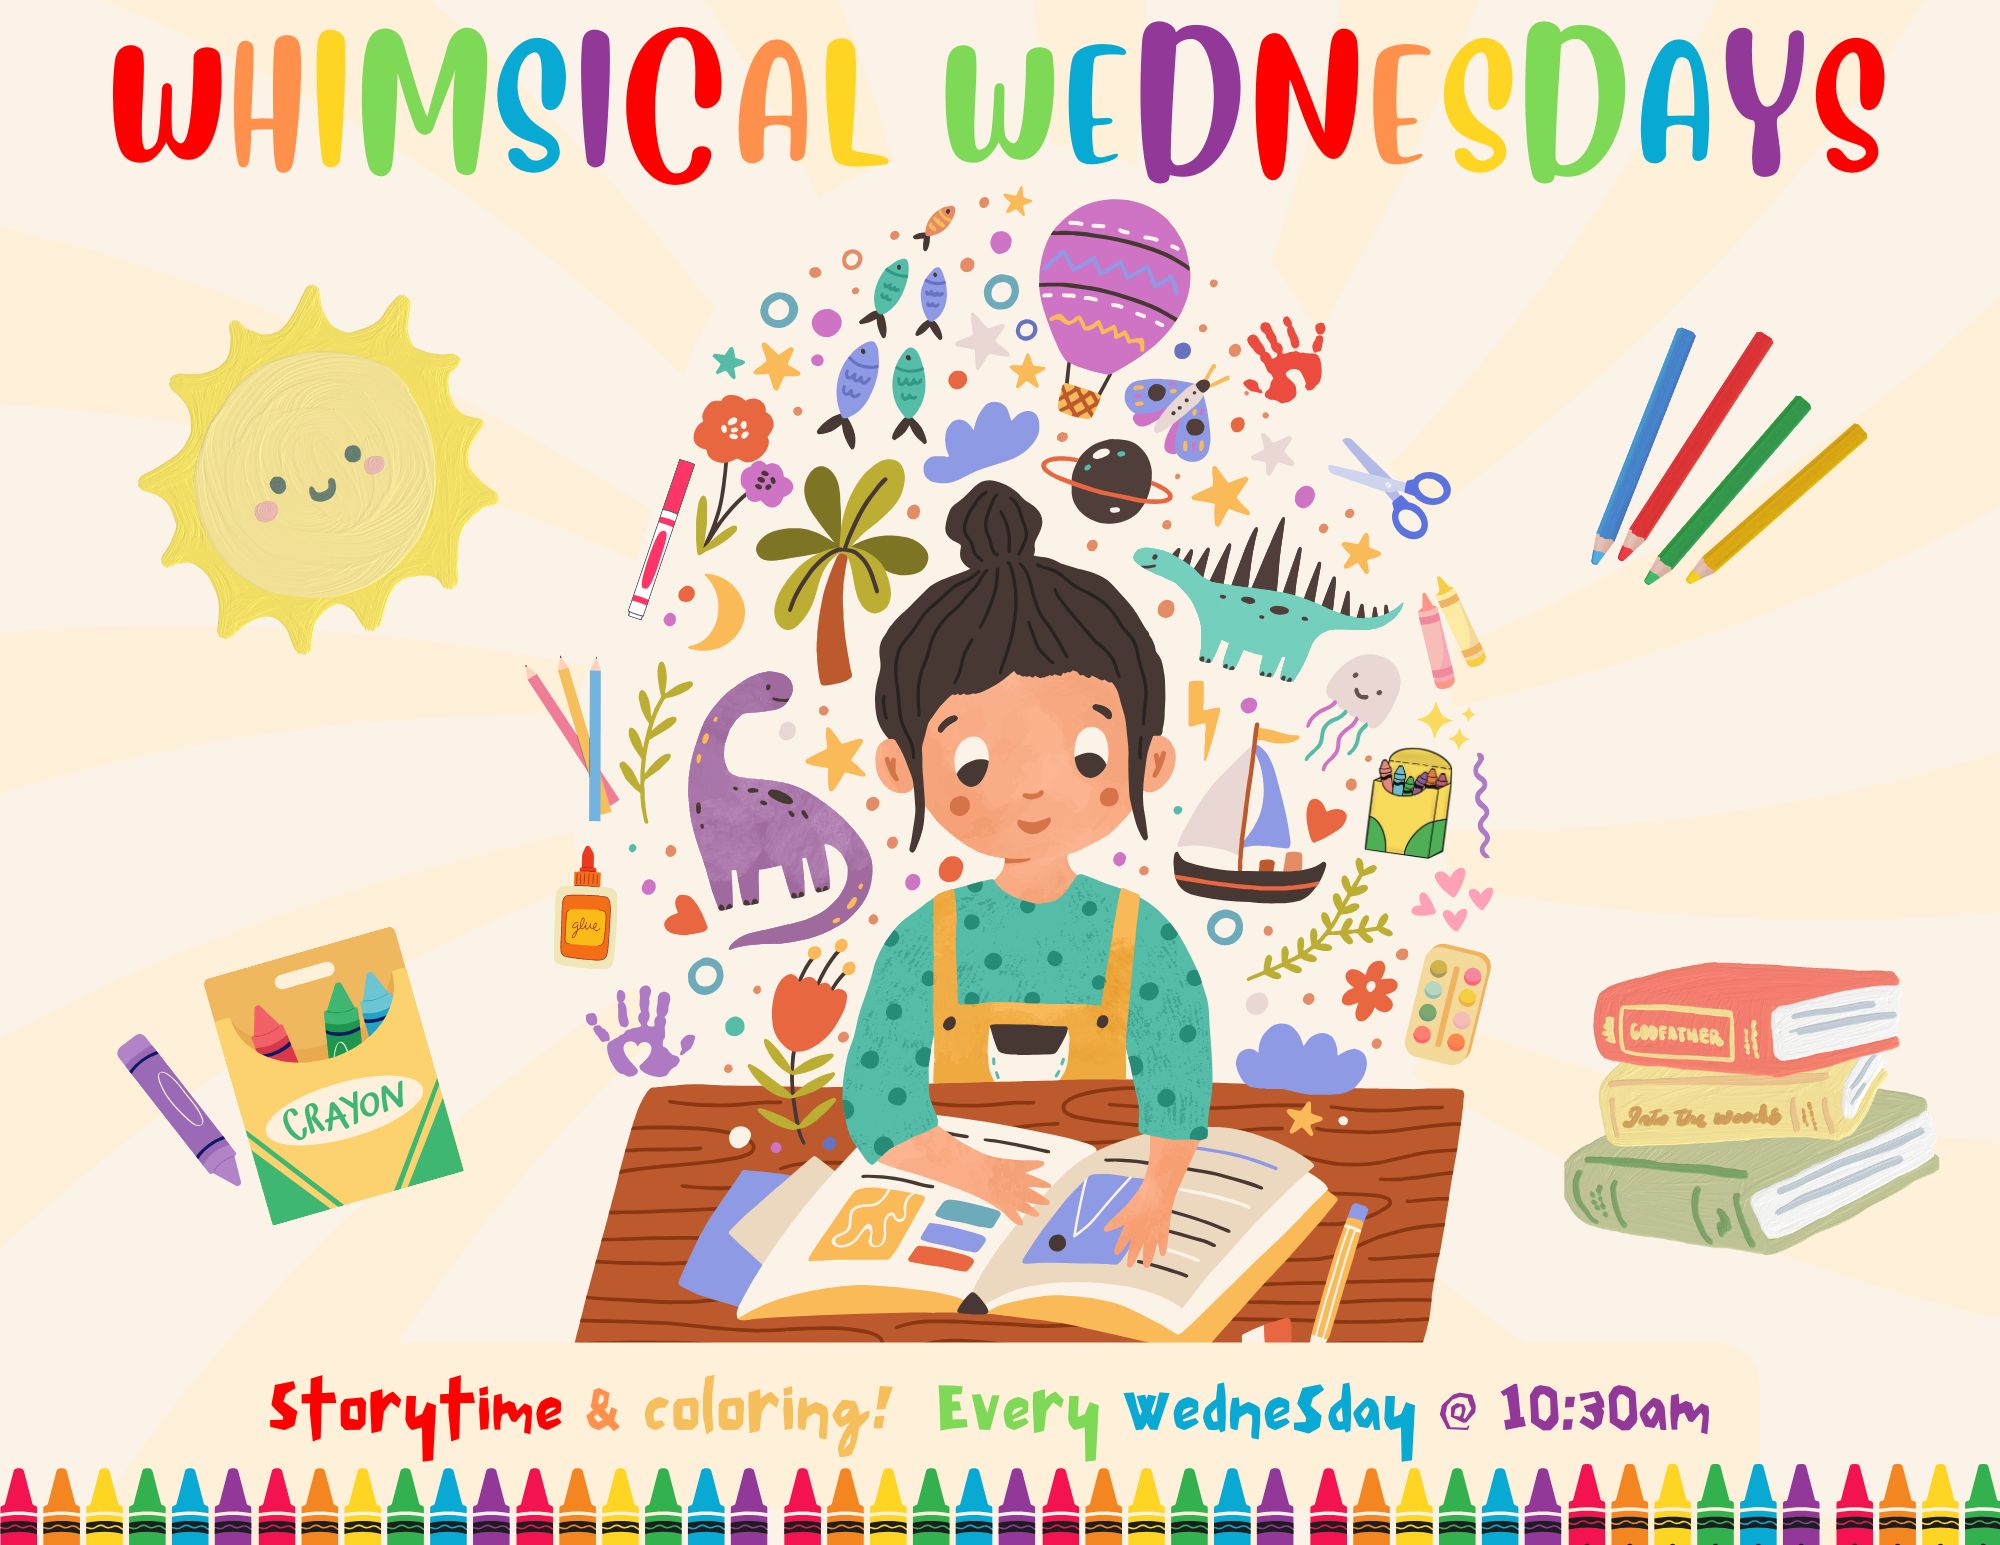 Whimsical Wednesdays . Every Wednesday from 10:30-11 am. Starting July 3rd through August 28th. Your little one can enjoy a fun Storytime, and wind down their sillies with group coloring after! New themes every week! Children ages 5 and under with an adult.  